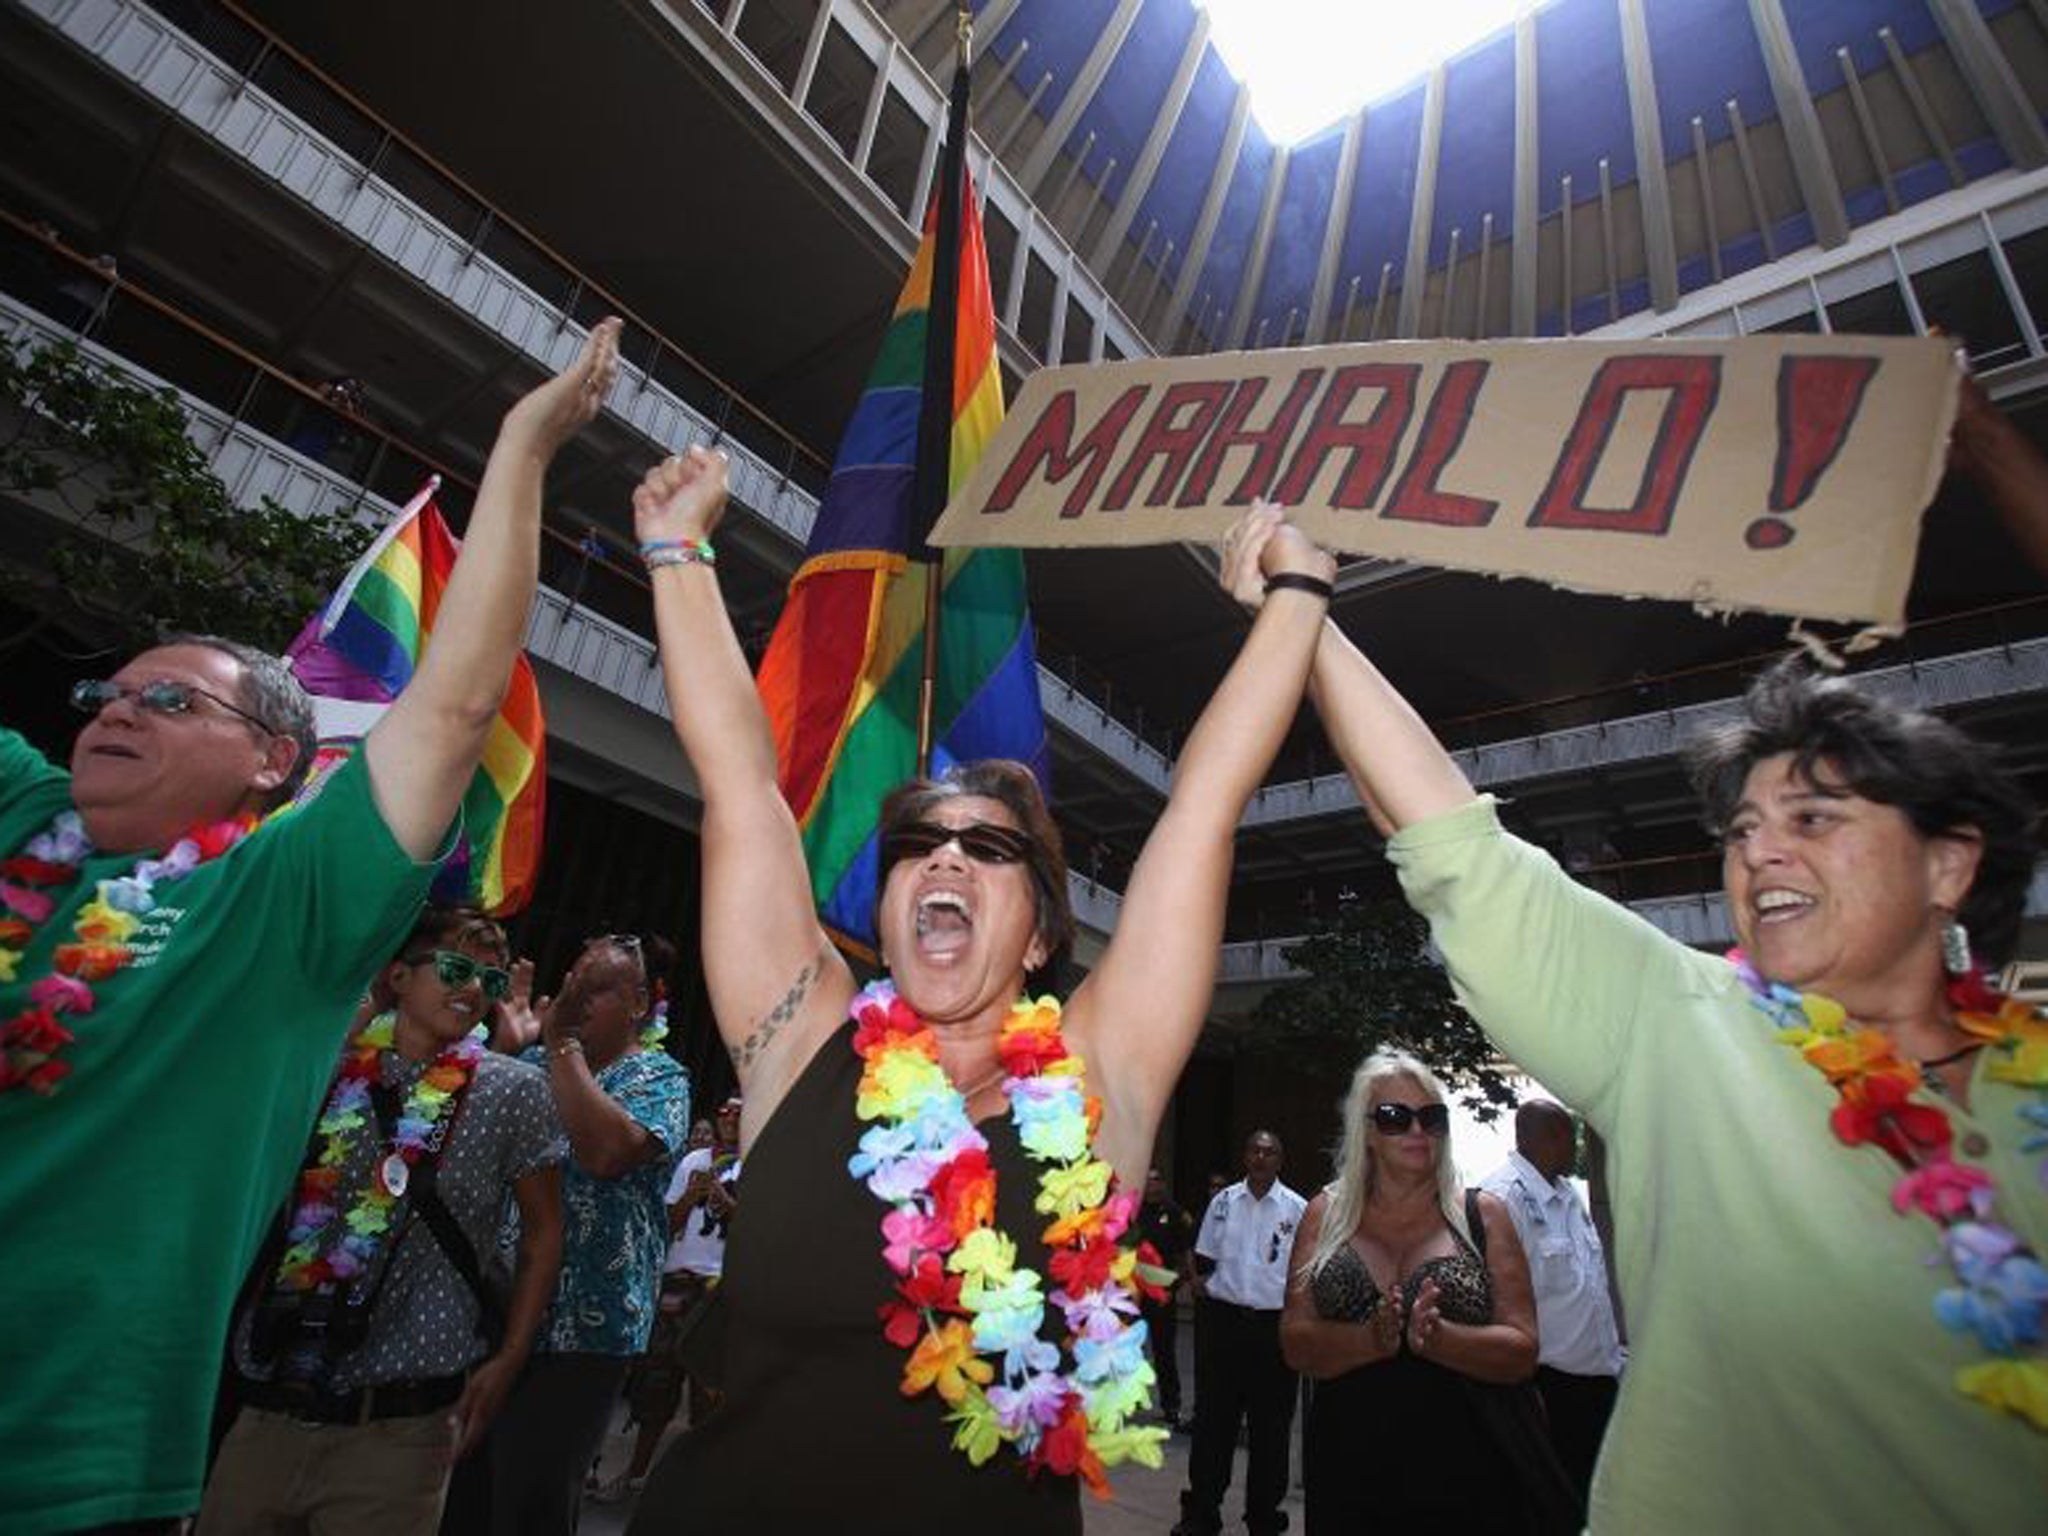 Hawaii Passes Gay Marriage Law The Independent The Independent